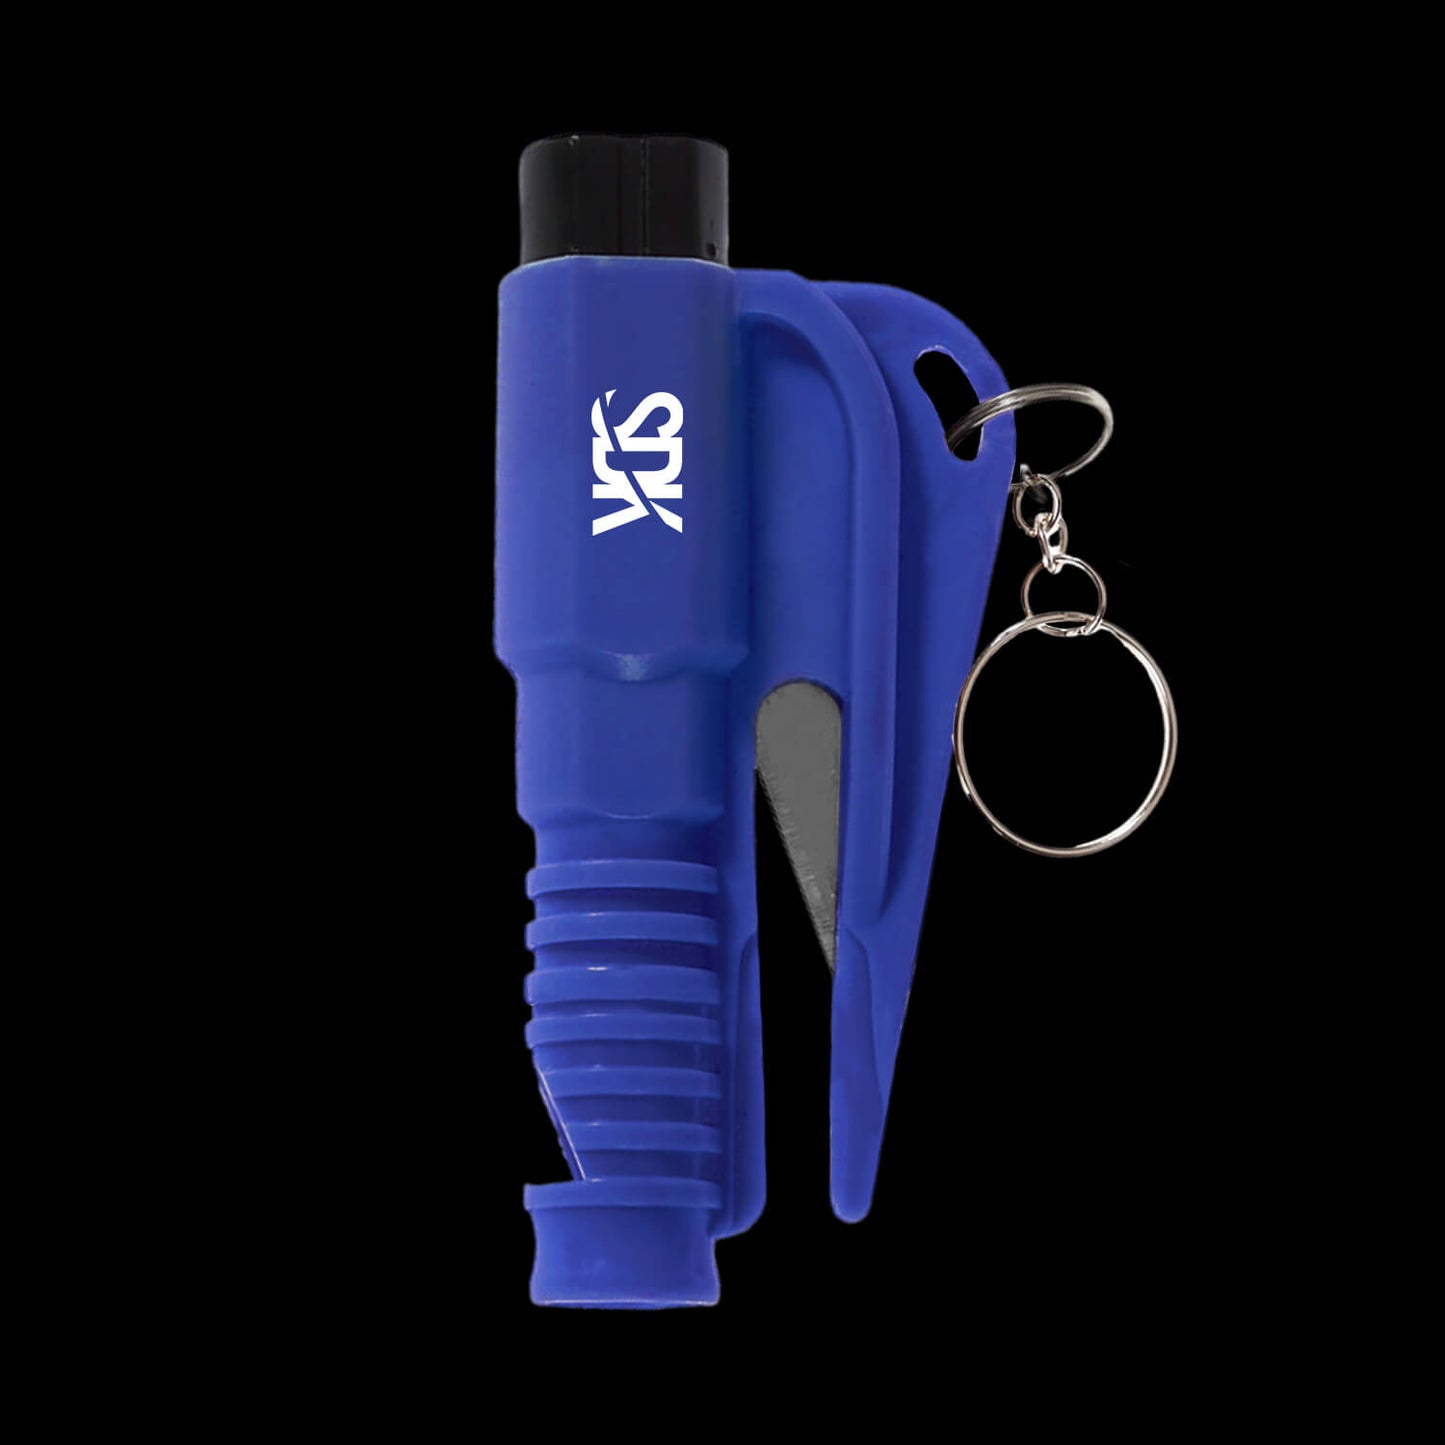 SDK Escape Tool Blue (all-in-one seat belt cutter, window breaker and whistle)